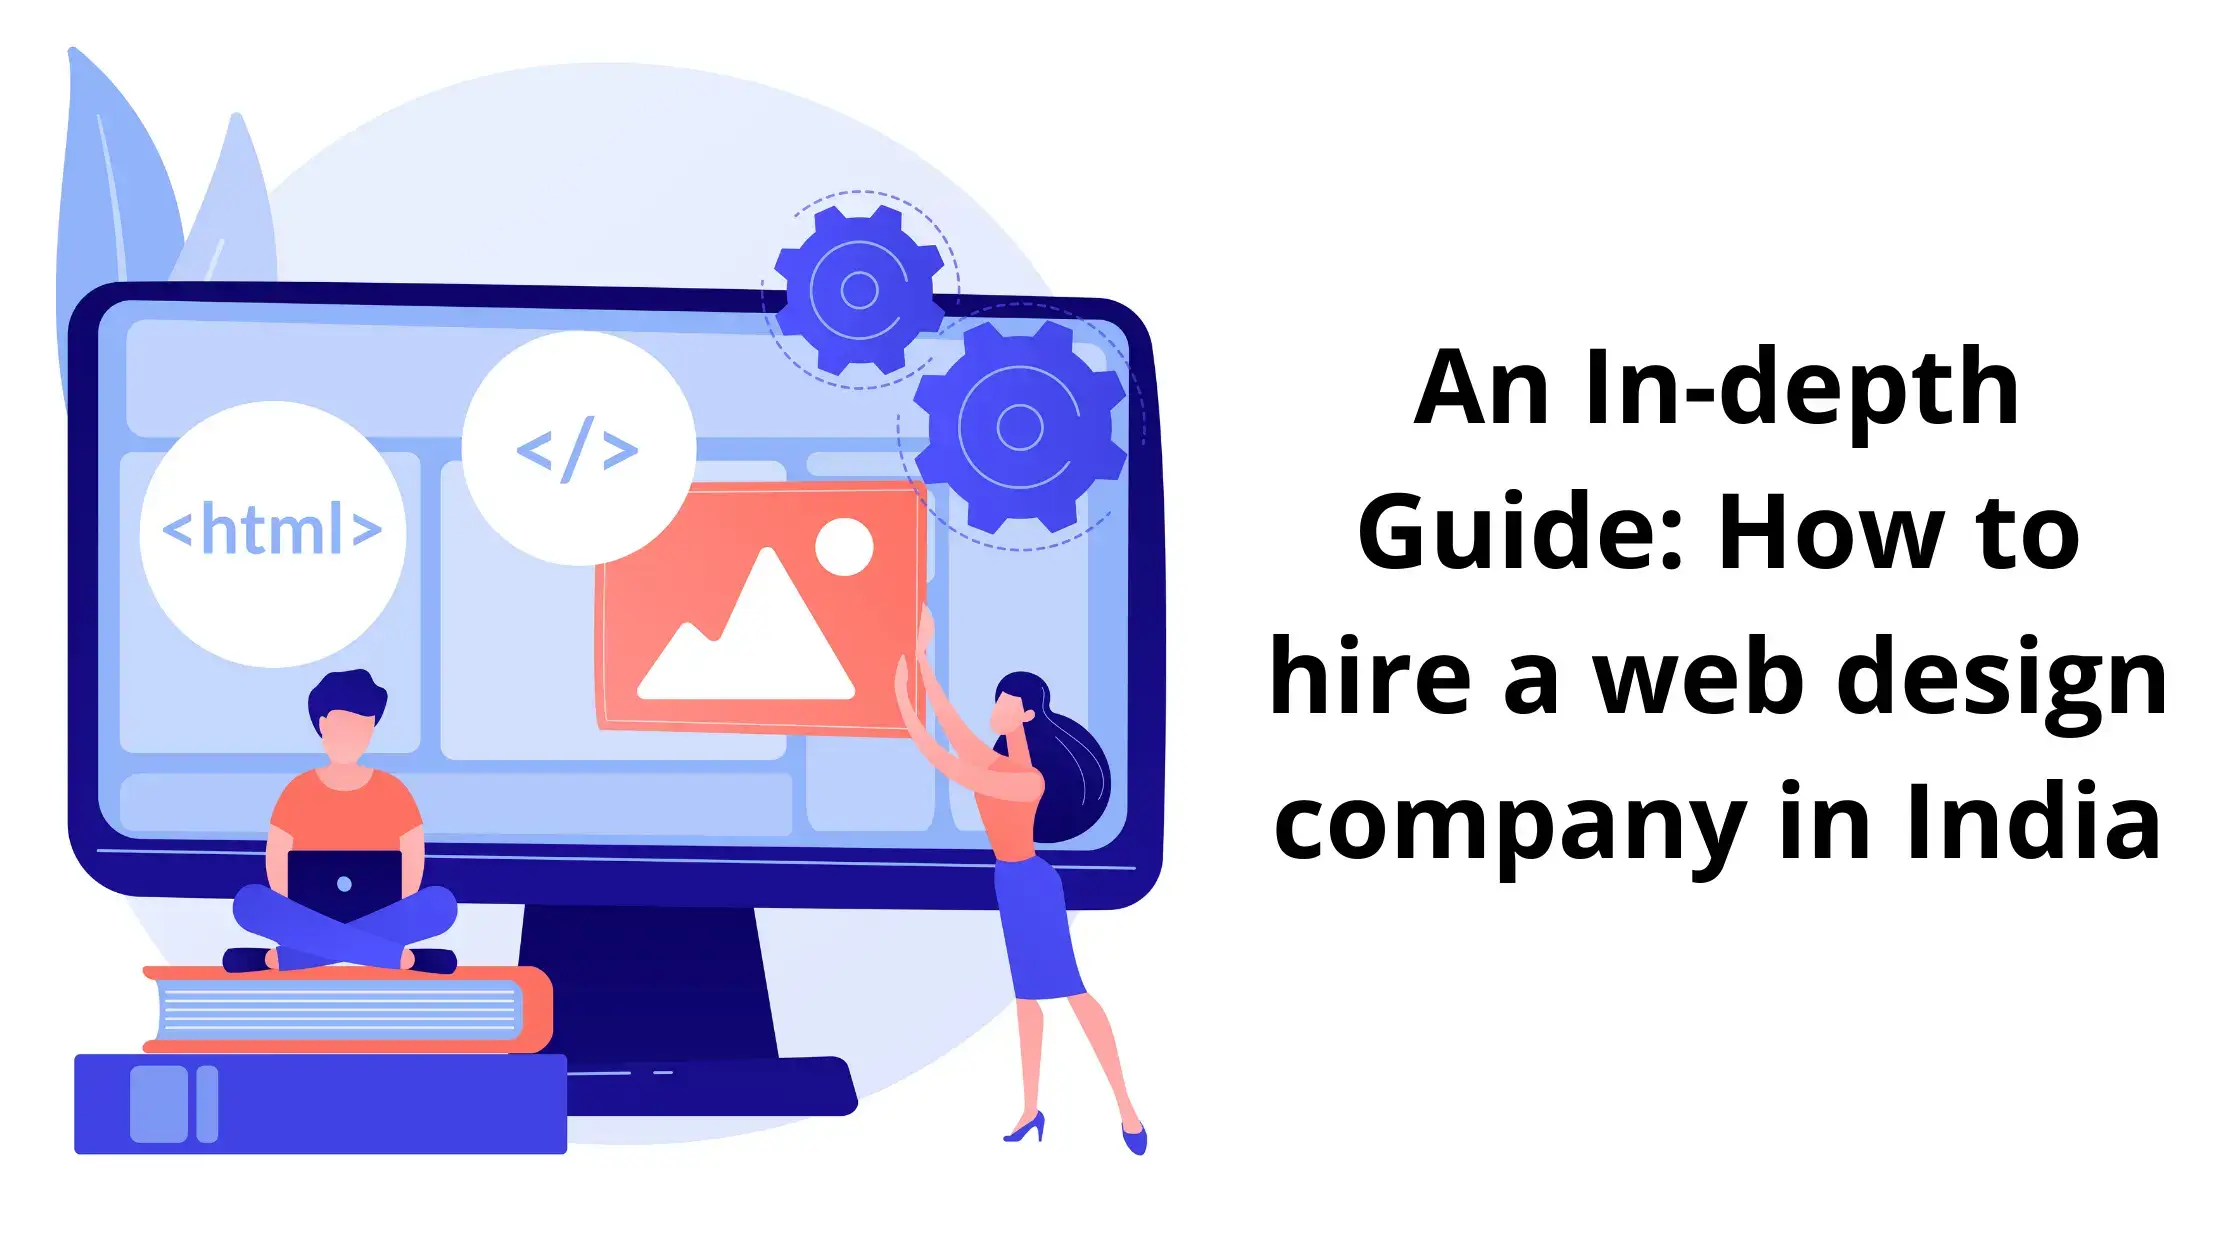 An-In-depth-Guide-How-to-hire-a-web-design-company-in-India